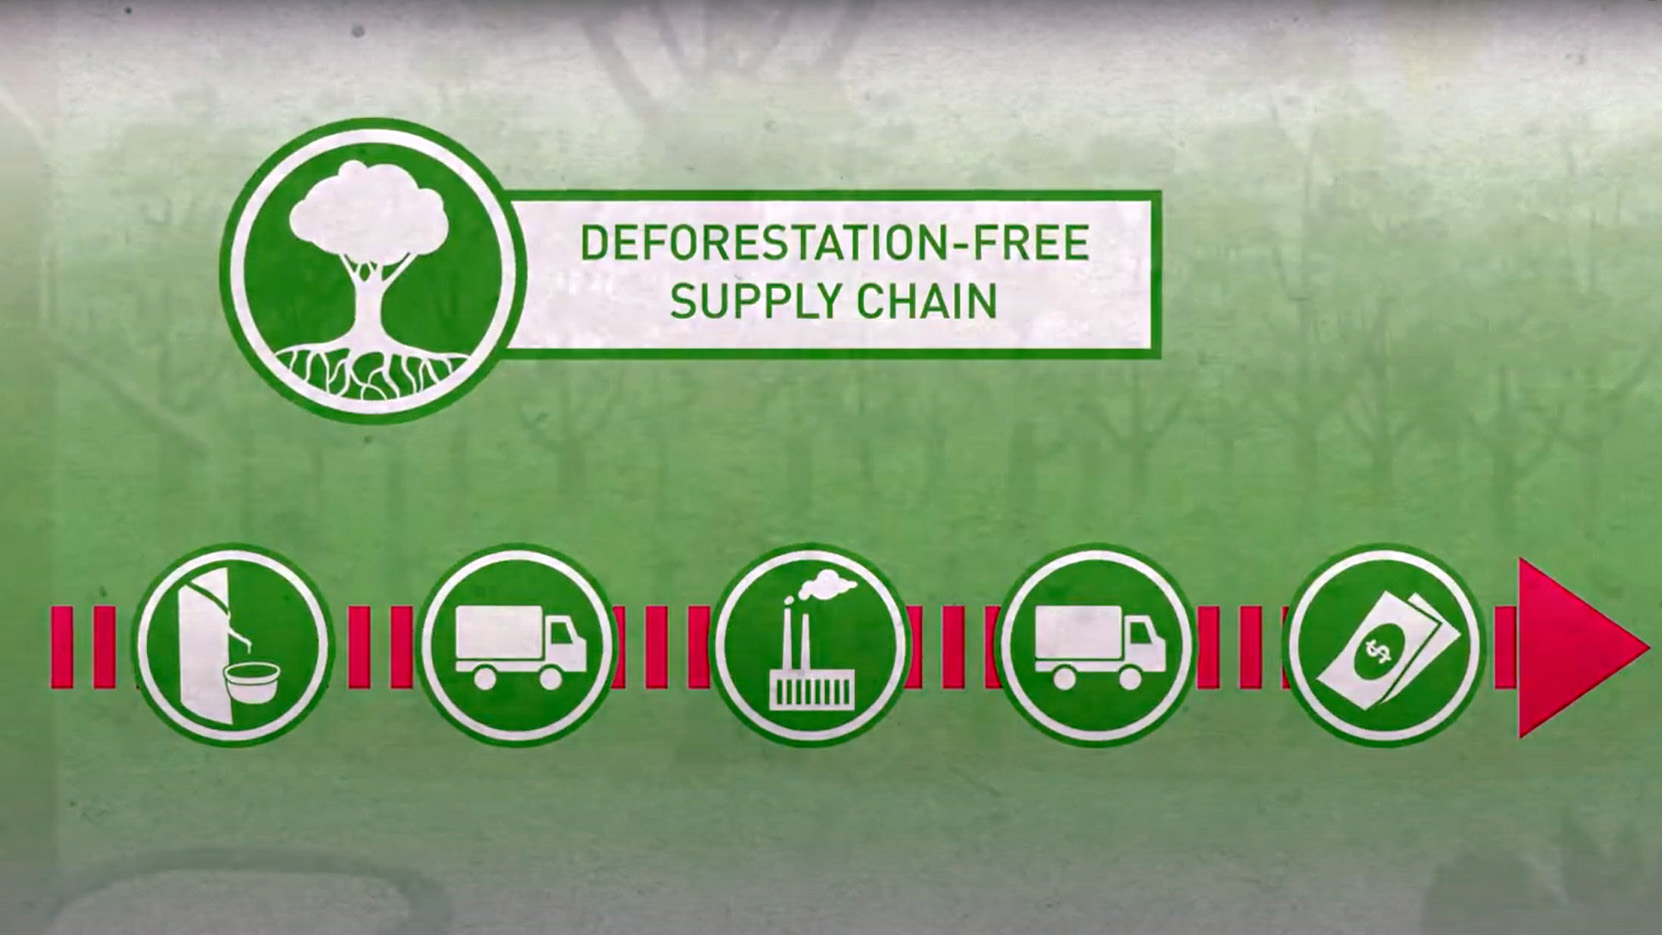 Still from the BMZ video "Sustainable supply chains through forest protection"